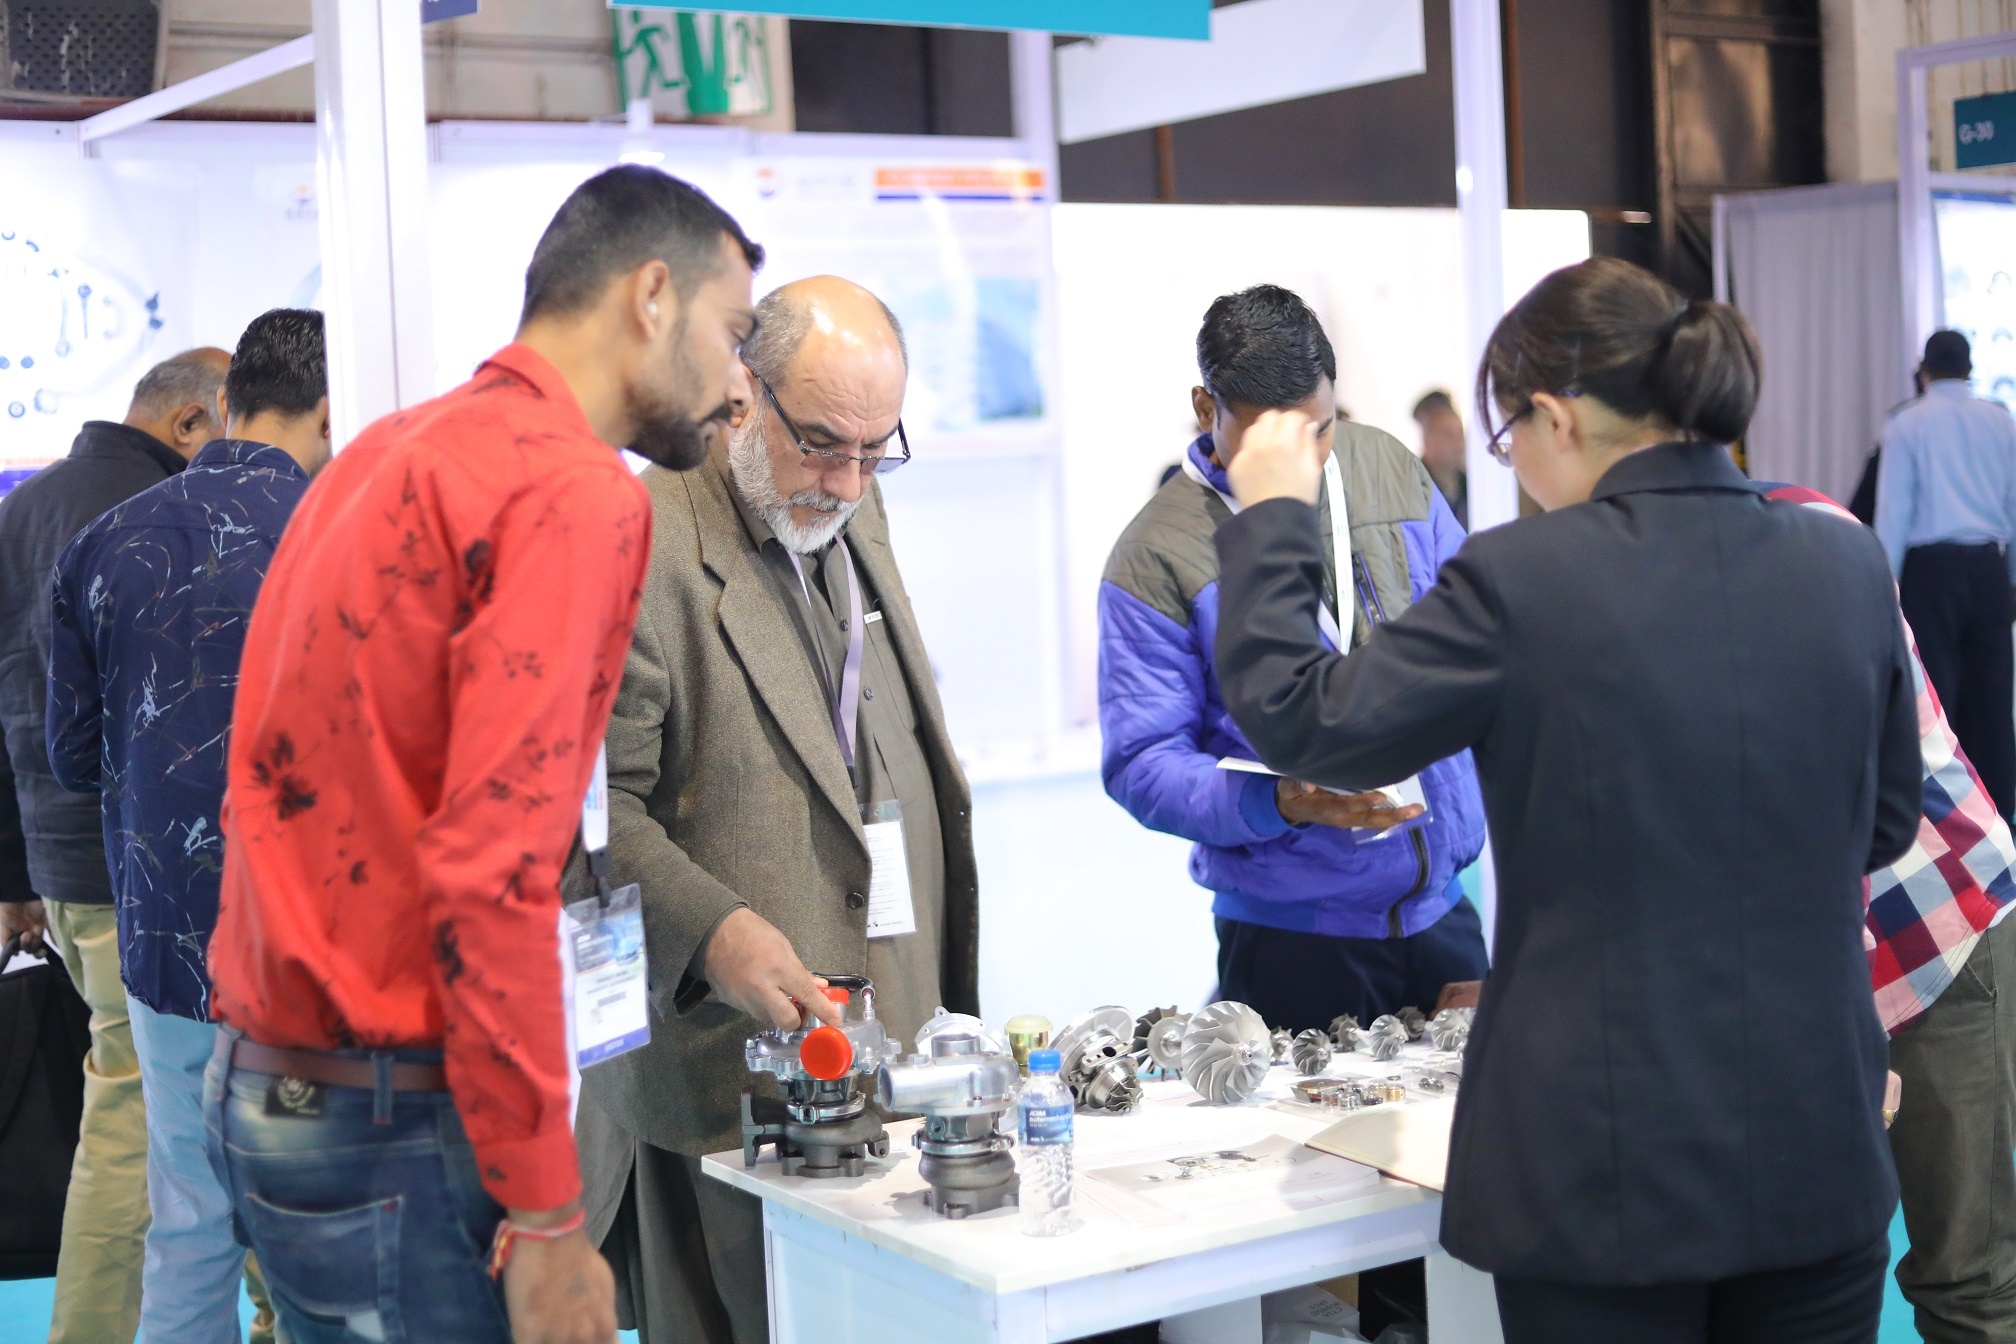 ACMA Automechanika New Delhi makes a successful virtual debut with more than 1,200 auto component products on display